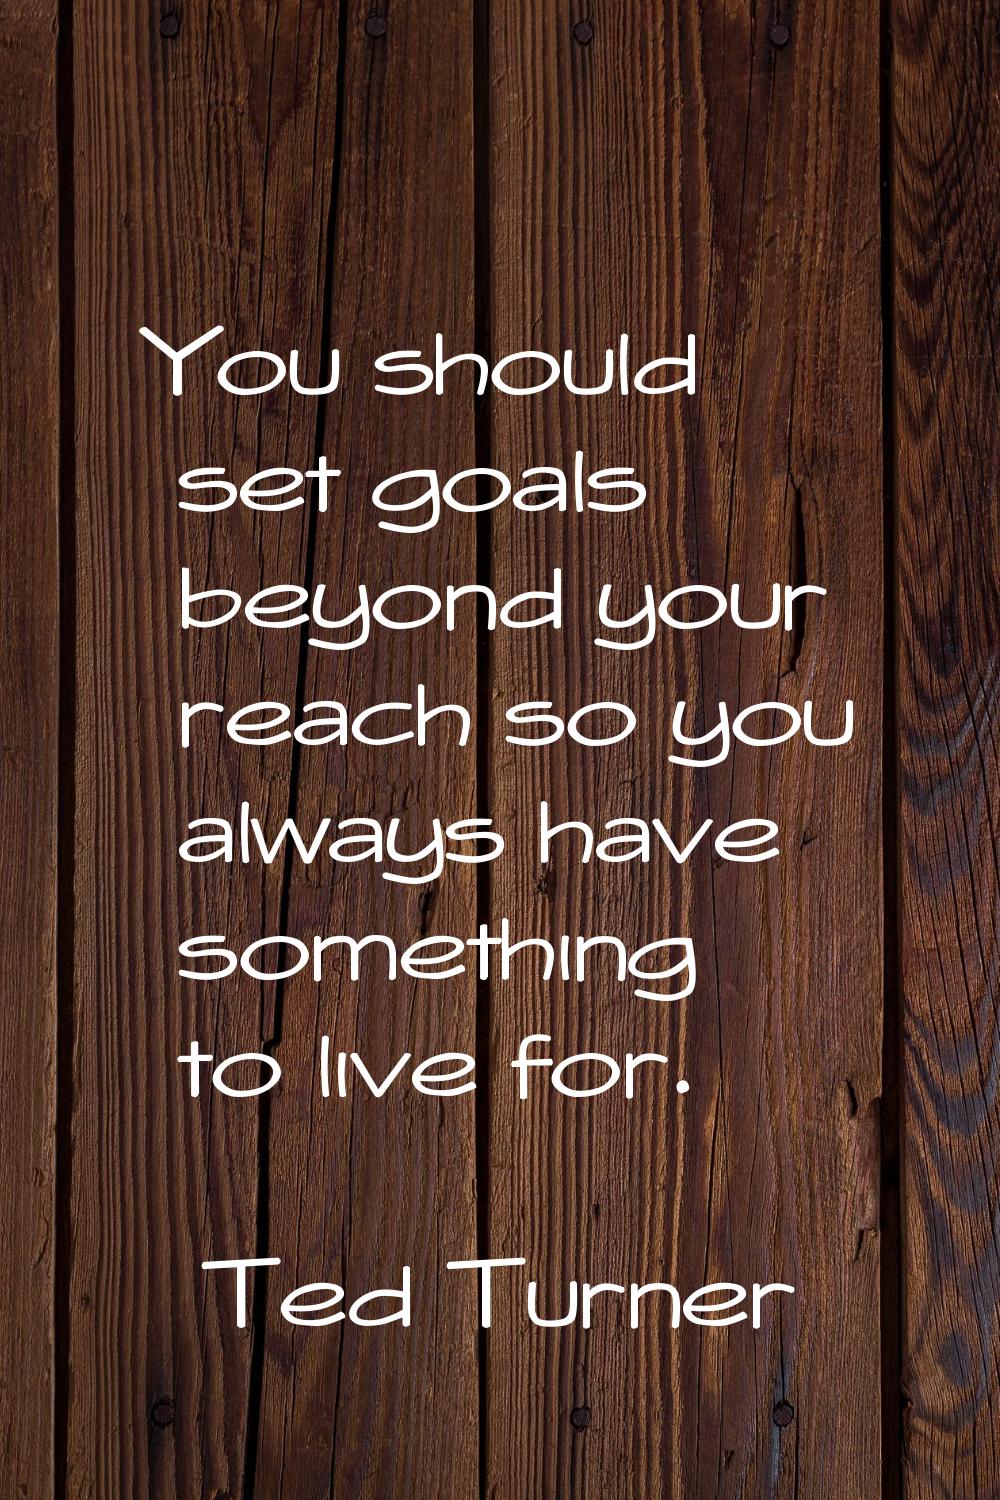 You should set goals beyond your reach so you always have something to live for.